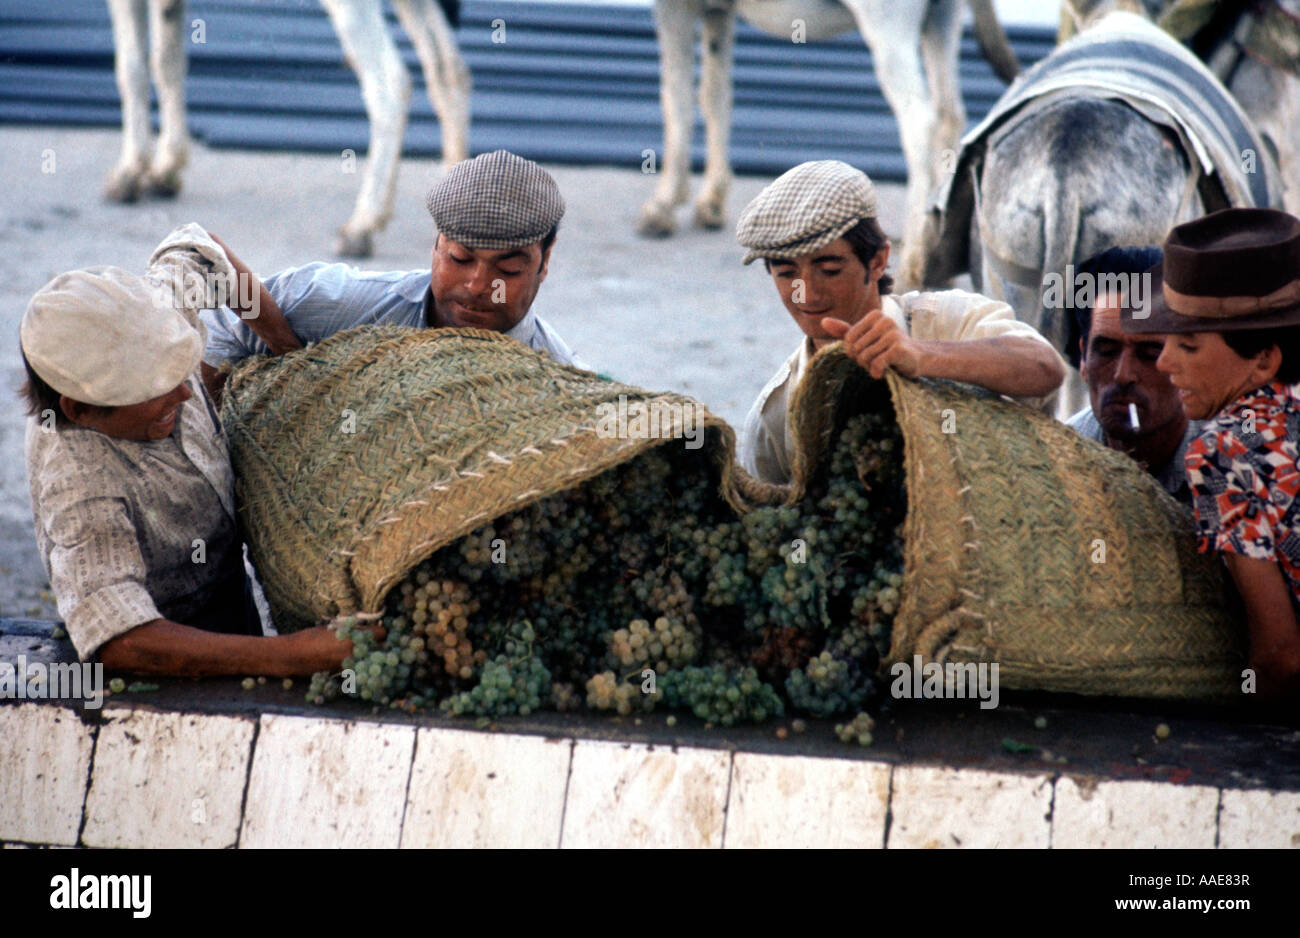 Spain. Sherry district. Growers arrive at sherry-making cooperatives with grapes.  Here they are dumped and weighed. Stock Photo